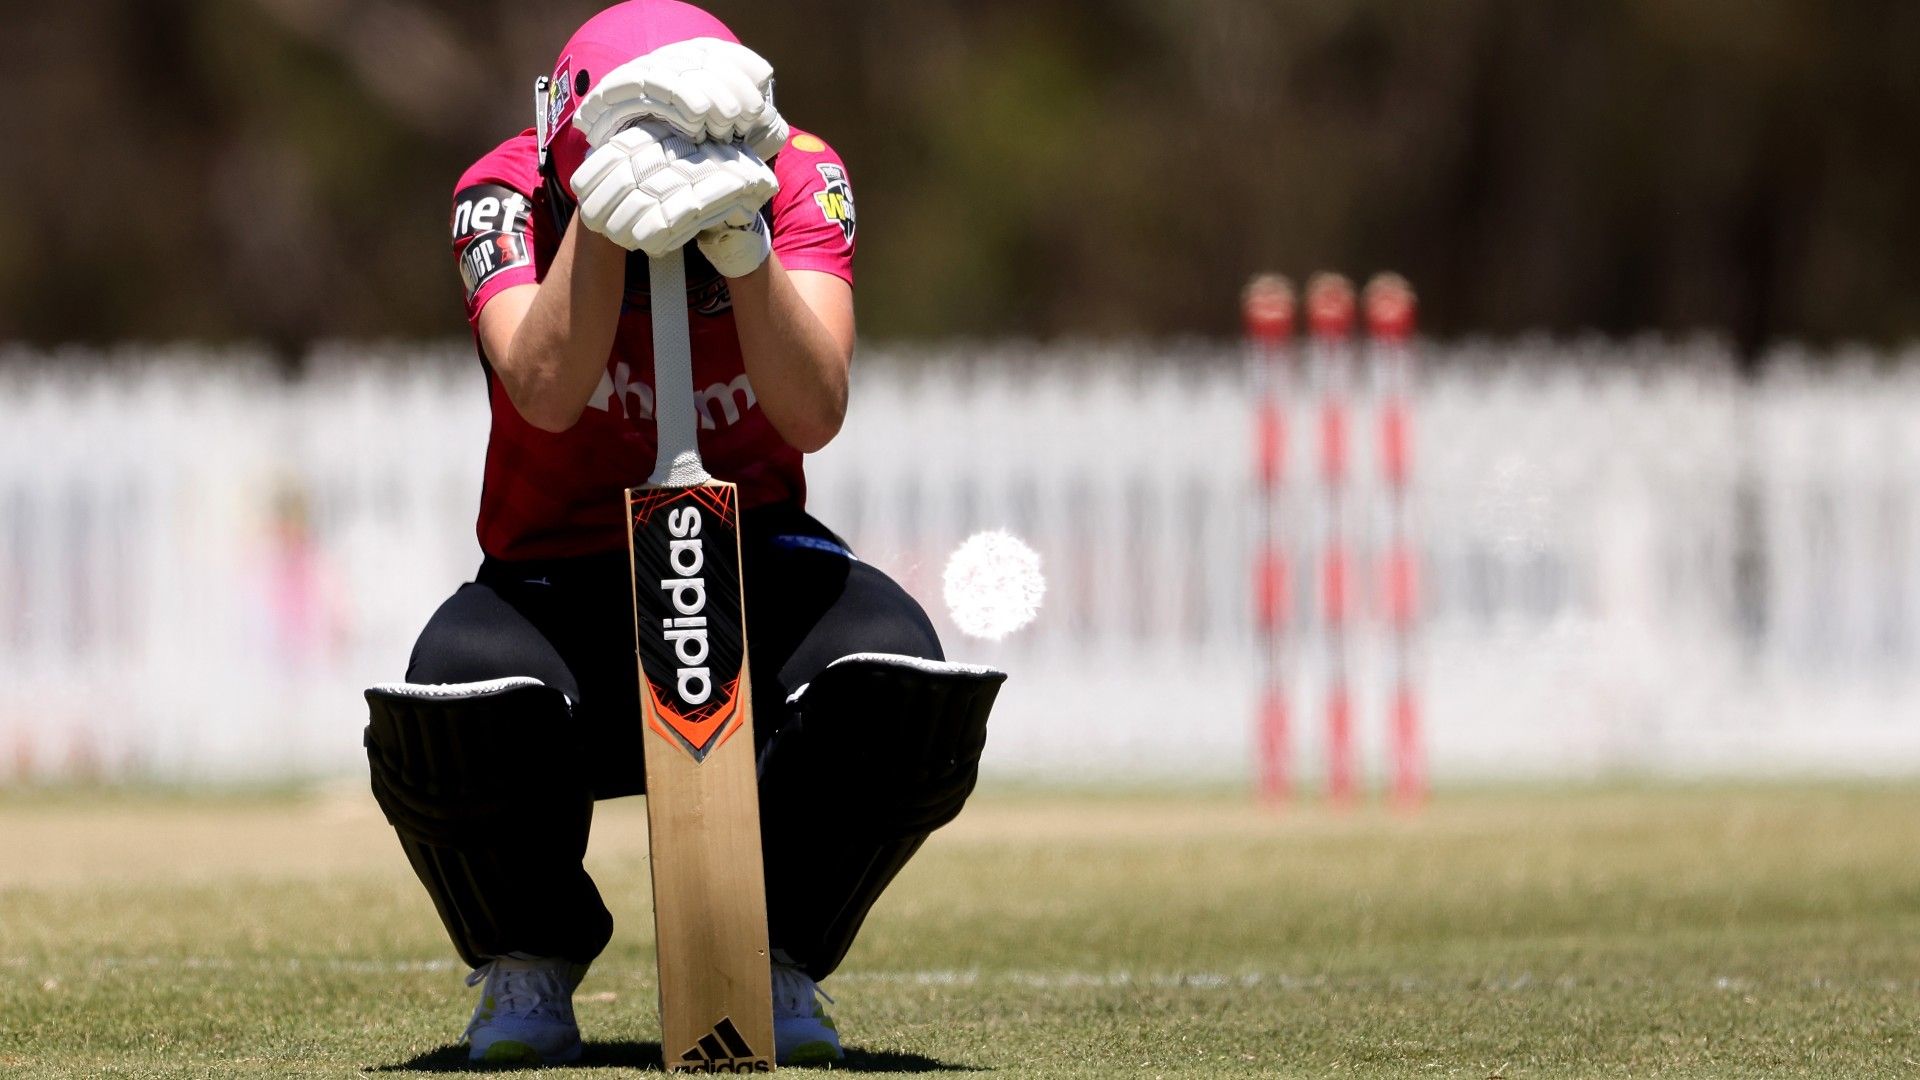 Sixers lose to Renegades, on three-match WBBL losing streak